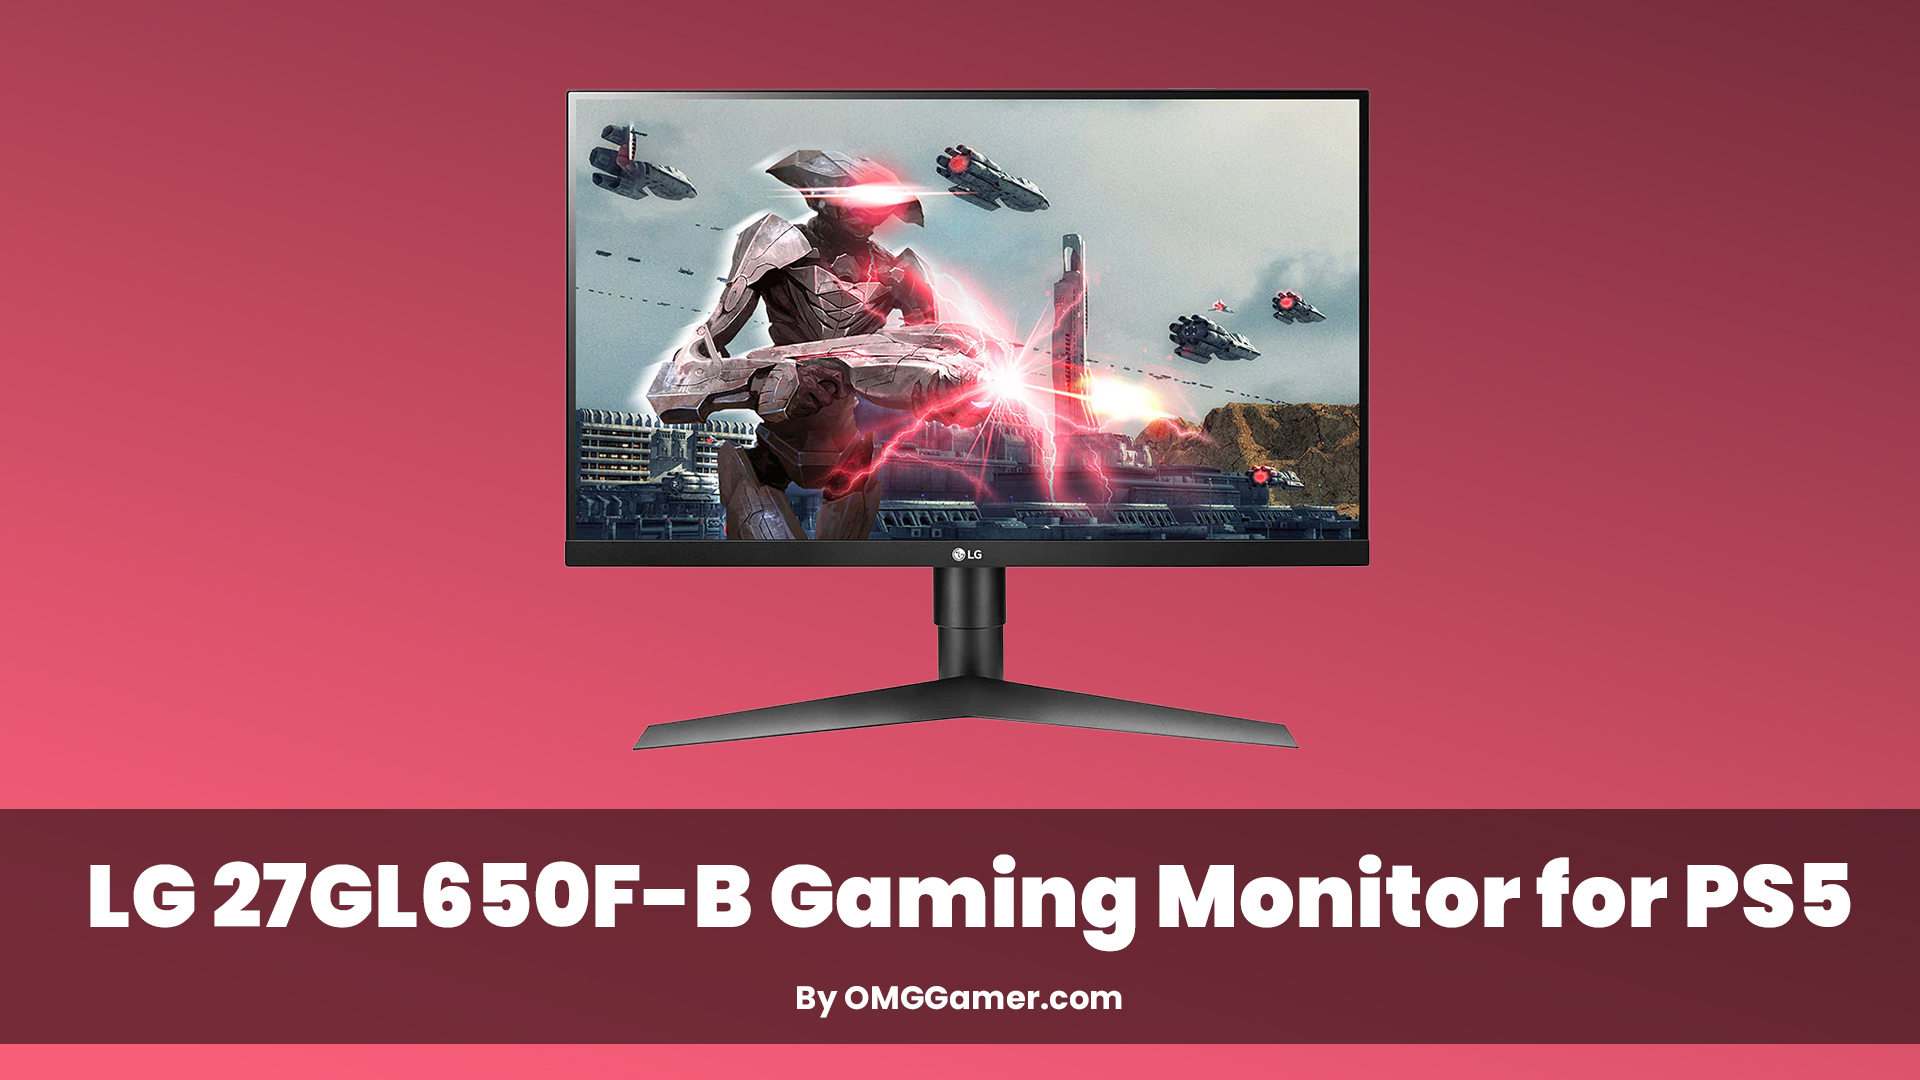 LG 27GL650F-B Gaming Monitor for PS5